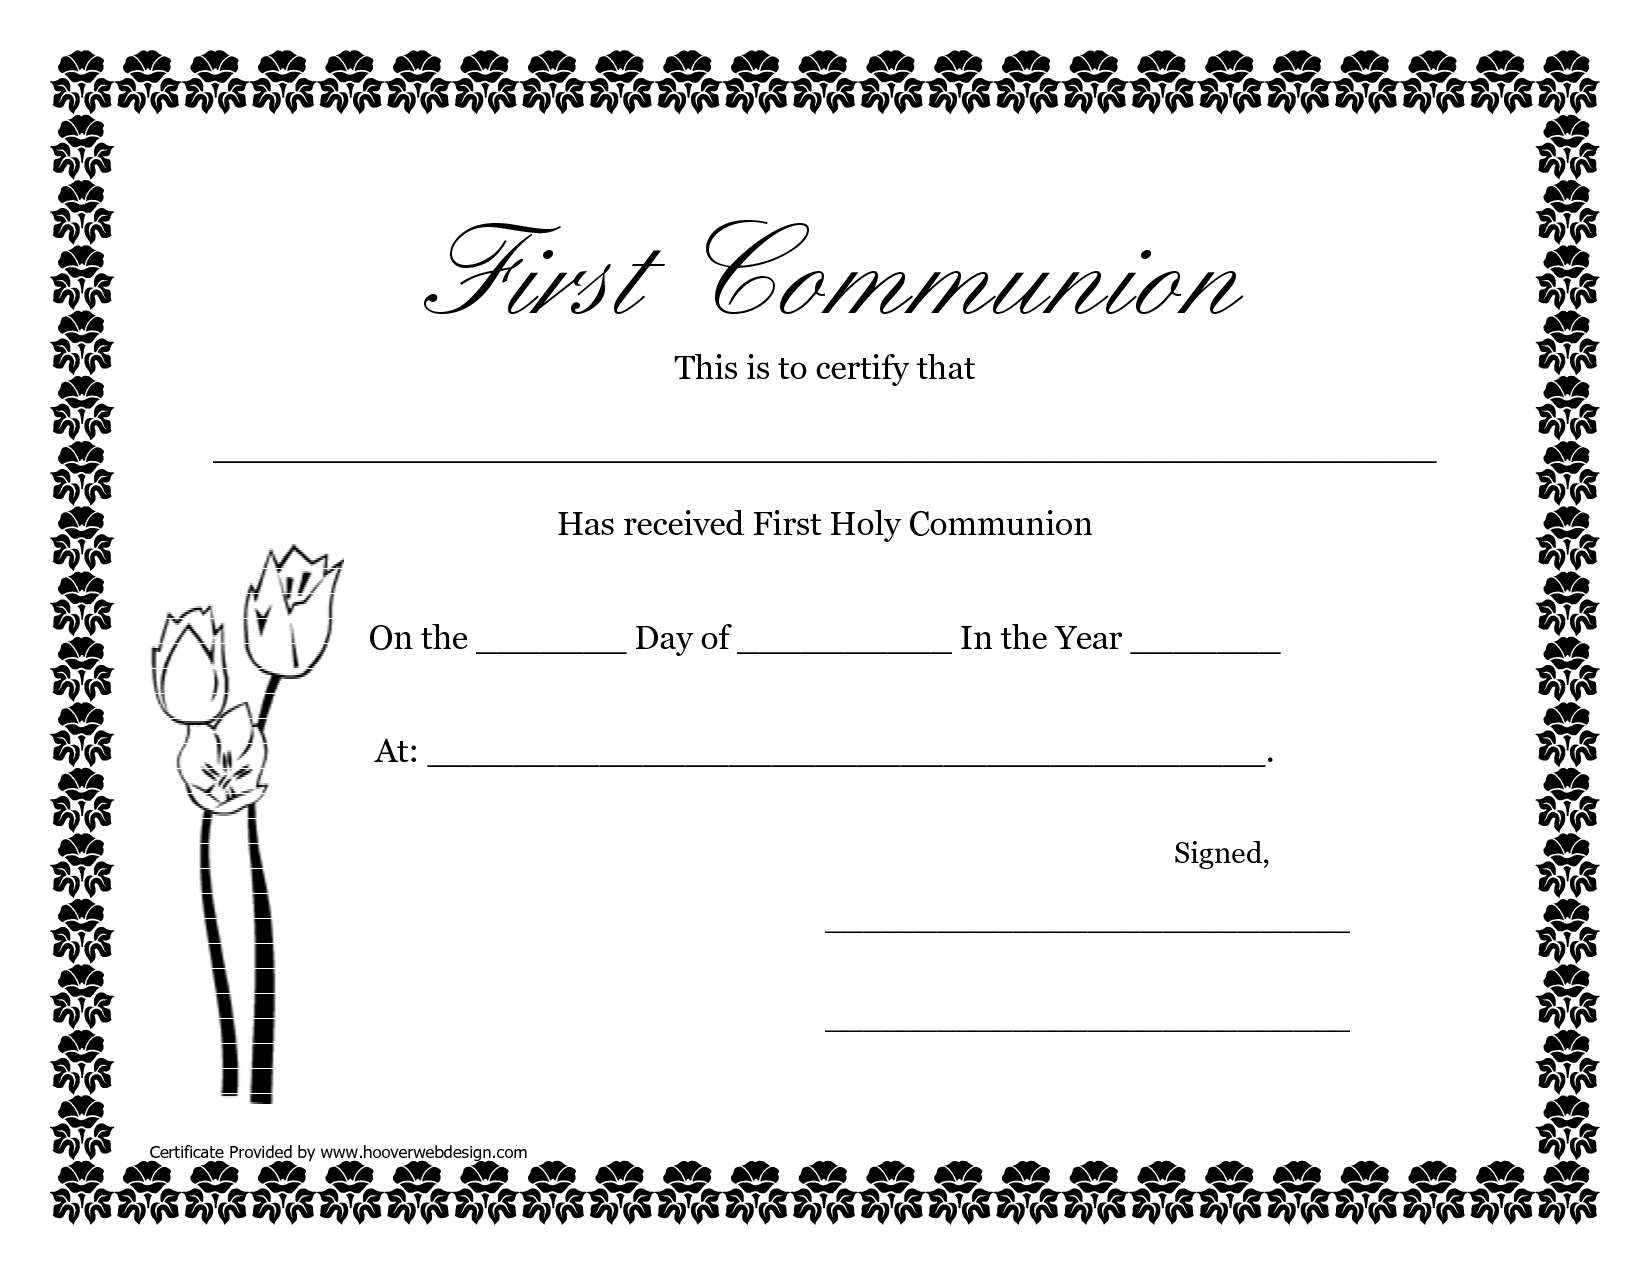 First Communion Banner Templates | Printable First Communion Within First Communion Banner Templates